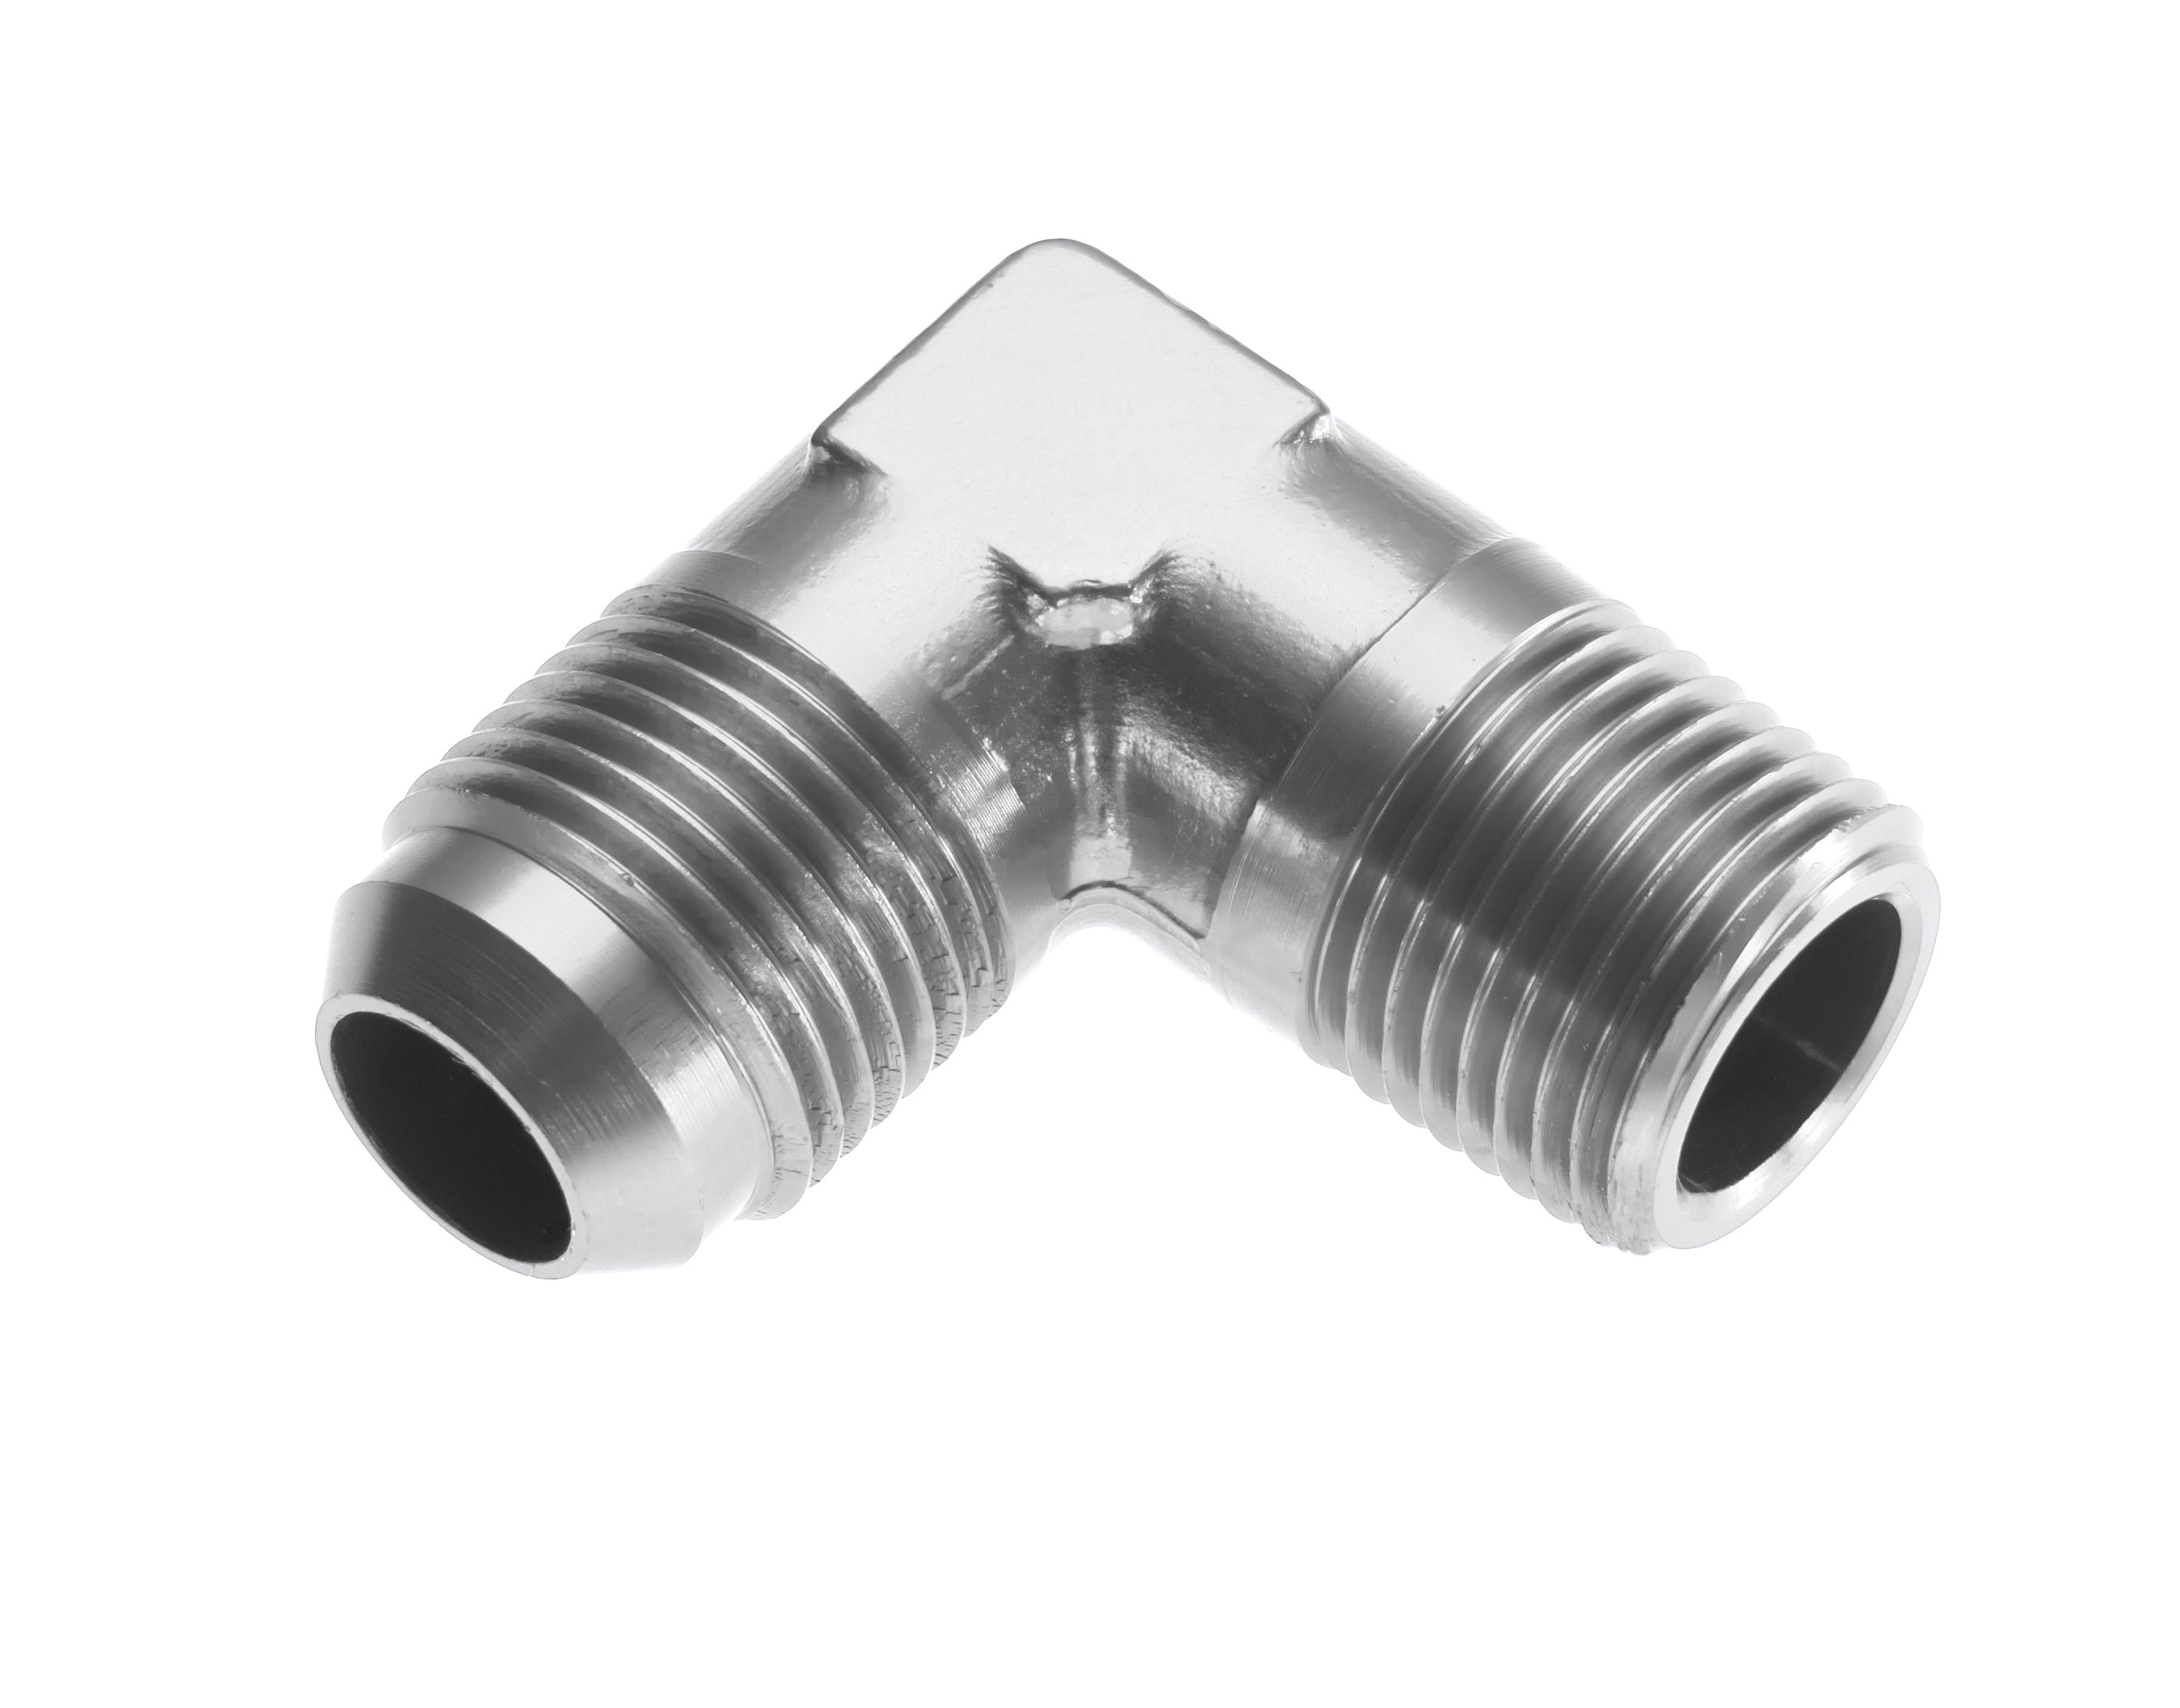 Redhorse Performance 822-08-12-5 -08 90 degree Male adapter to -12 (3/4in) NPT Male - clear